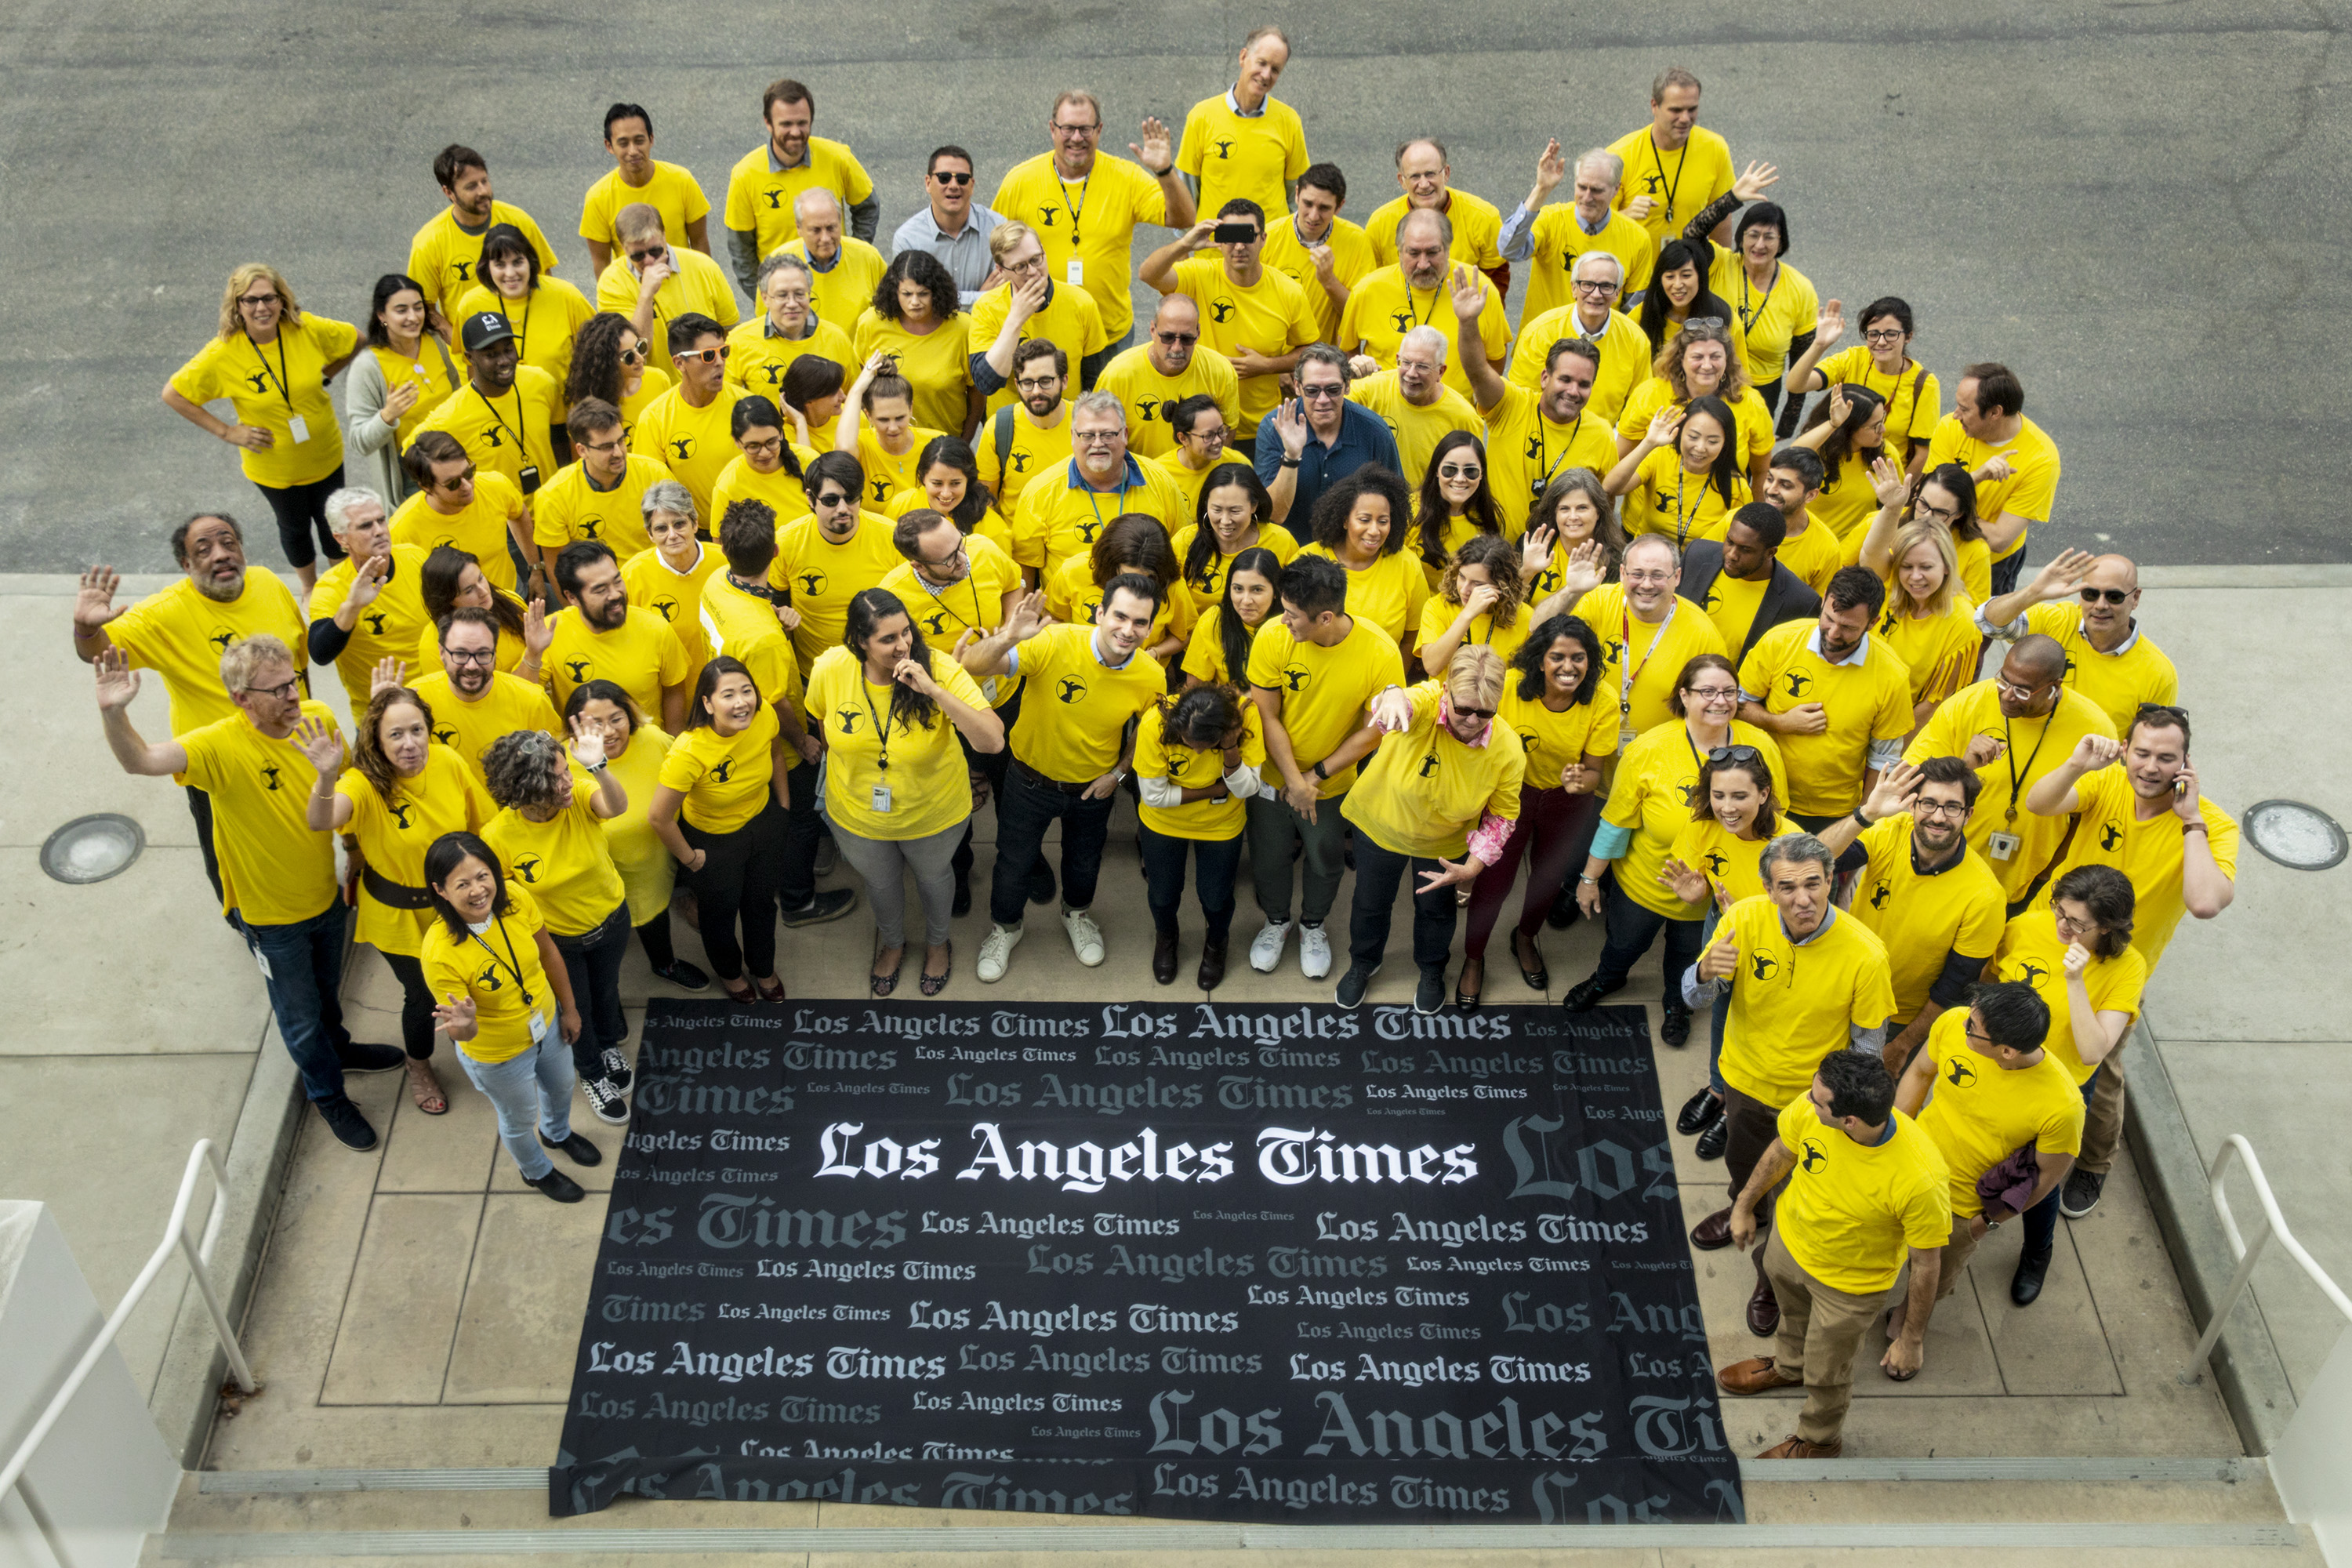 Members of the Los Angeles Times Guild. Times journalists voted overwhelmingly to unionize in January 2018